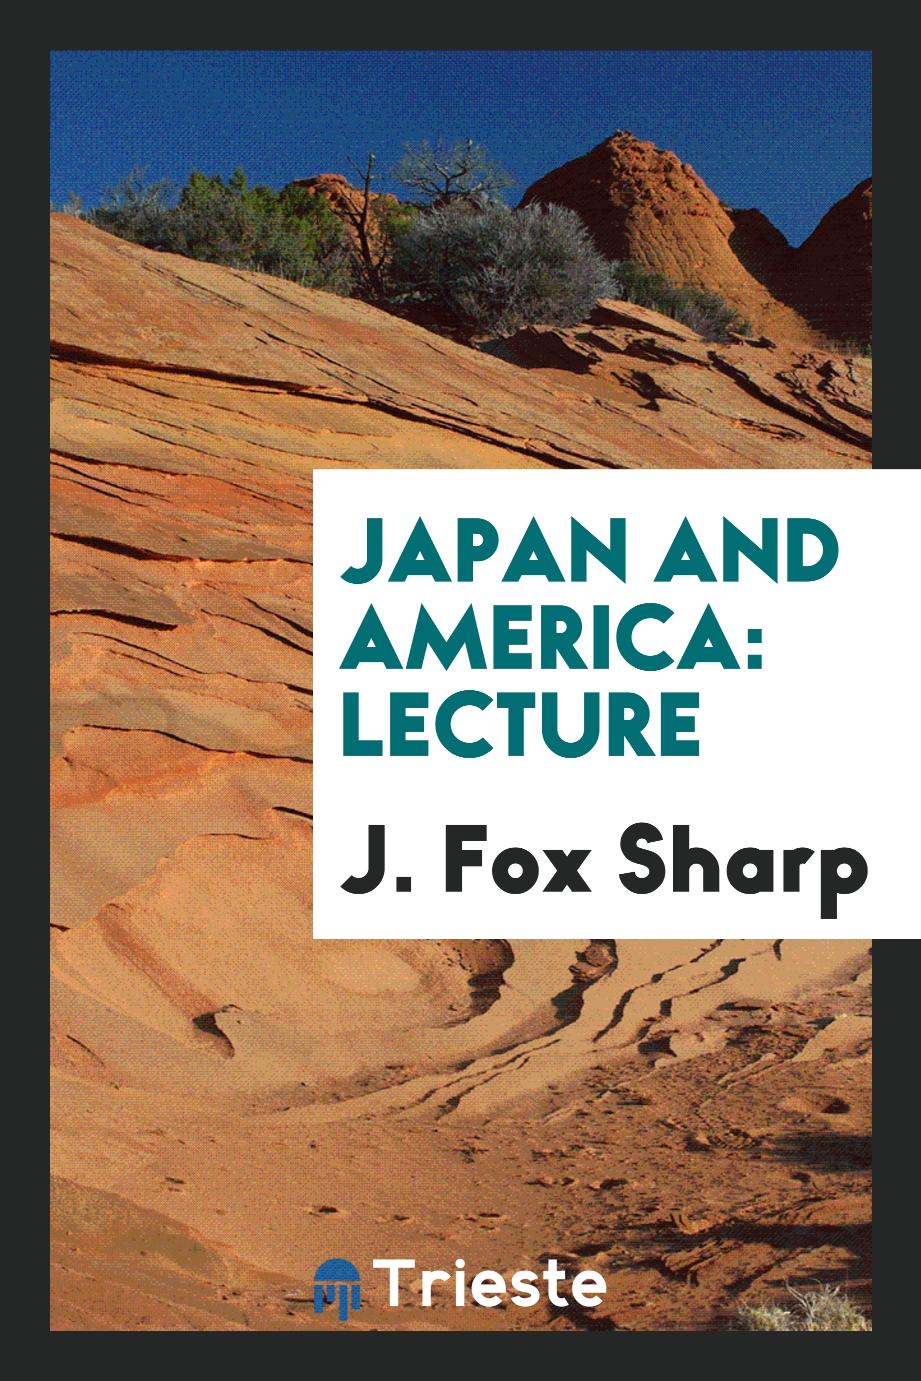 Japan and America: Lecture